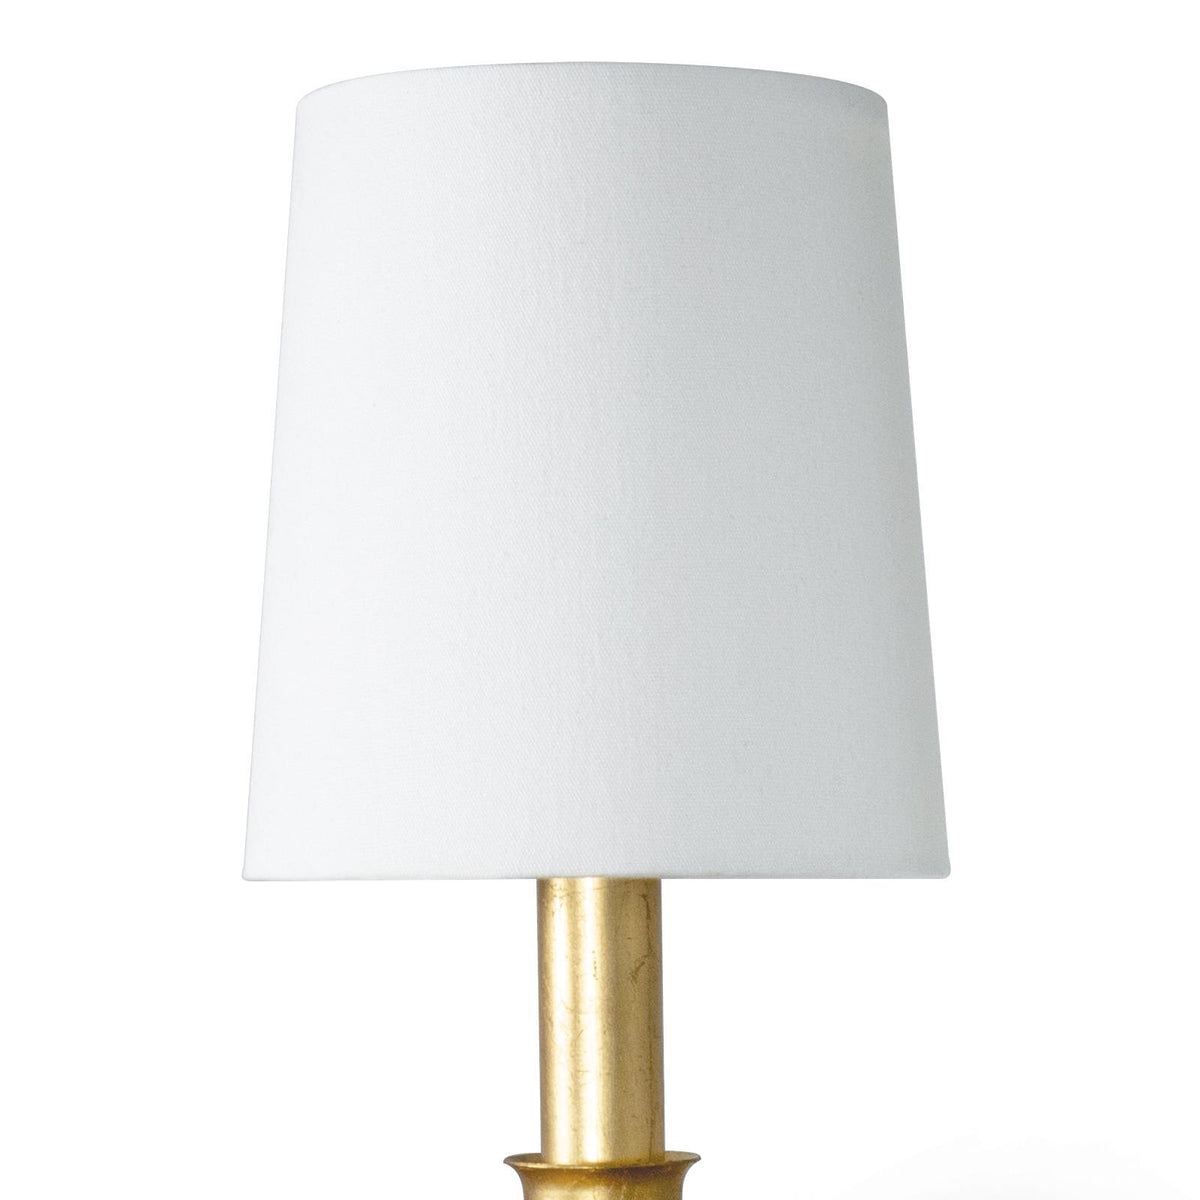 Regina Andrew - Southern Living Fisher Wall Sconce - 15-1166 | Montreal Lighting & Hardware